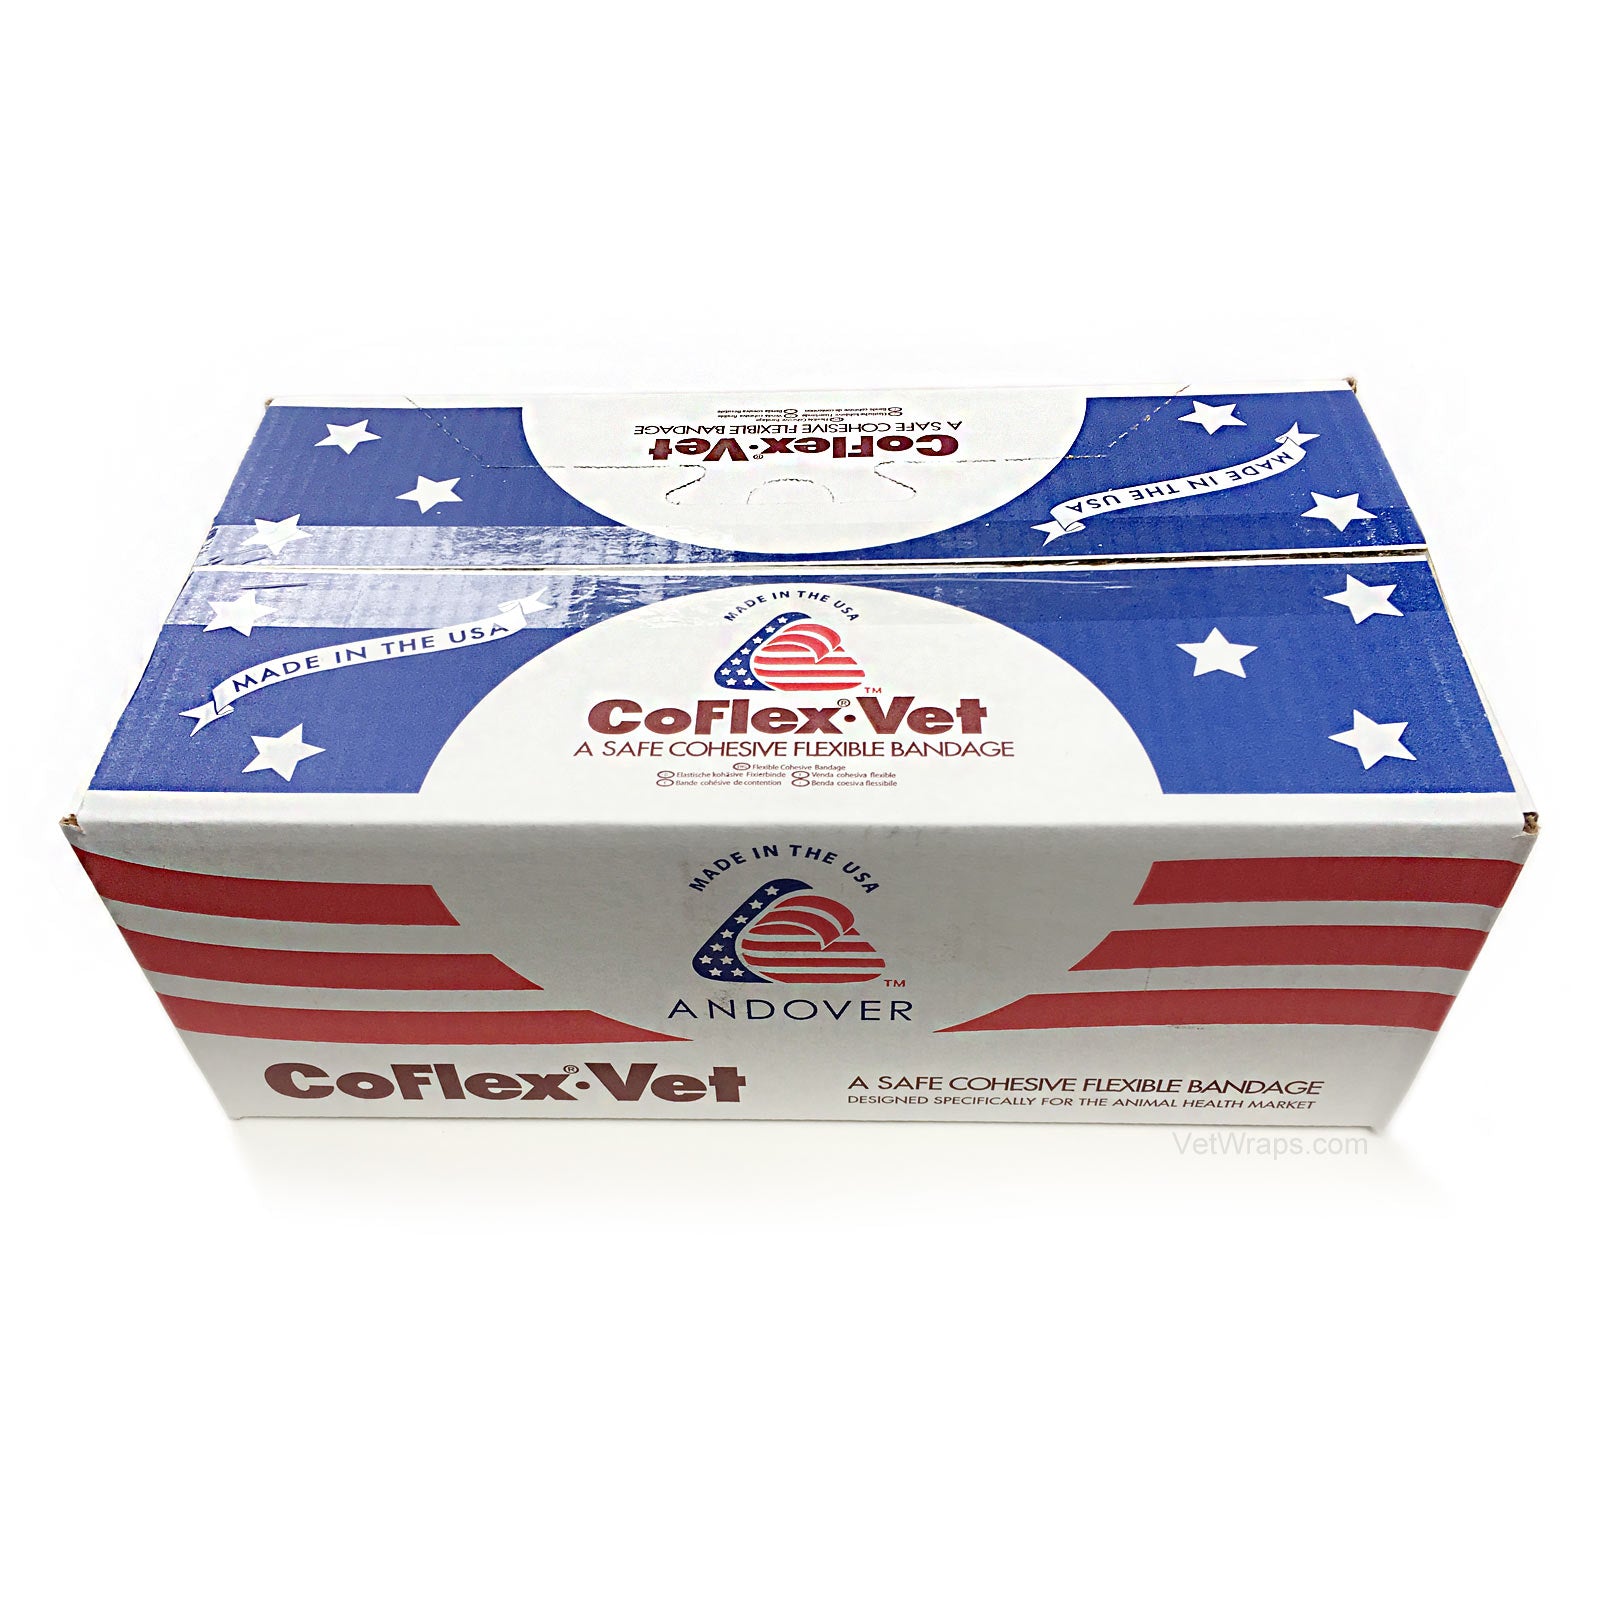 Andover CoFlex Vet Cohesive Bandage Box for 18 Pack